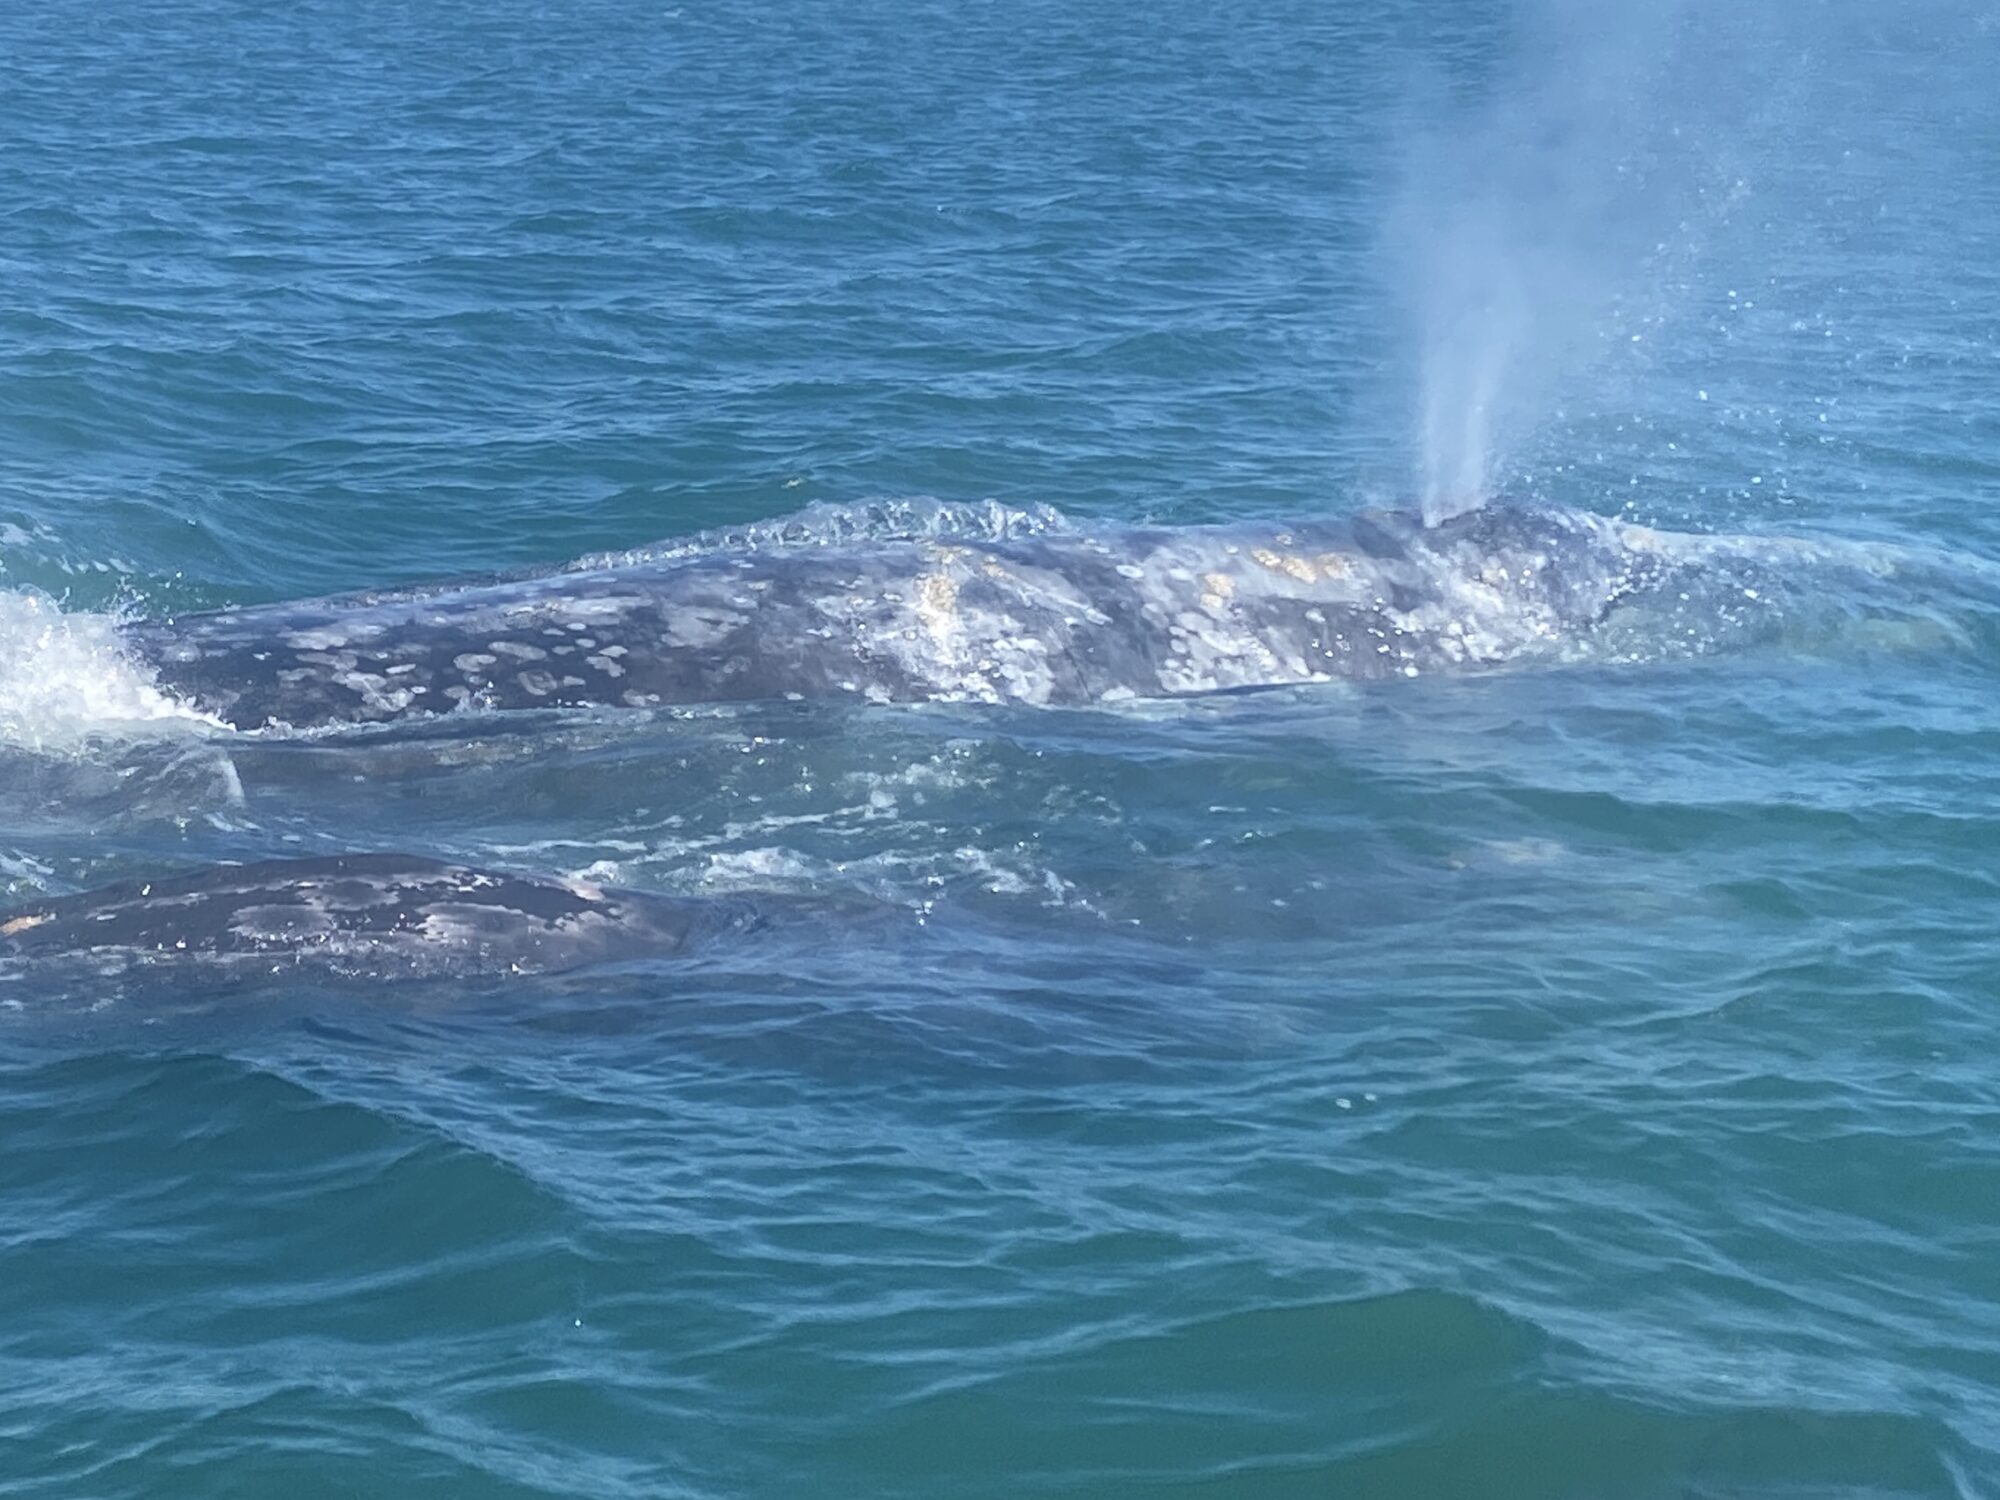 Gray whales on whale watching tour while camping in Baja California Sur